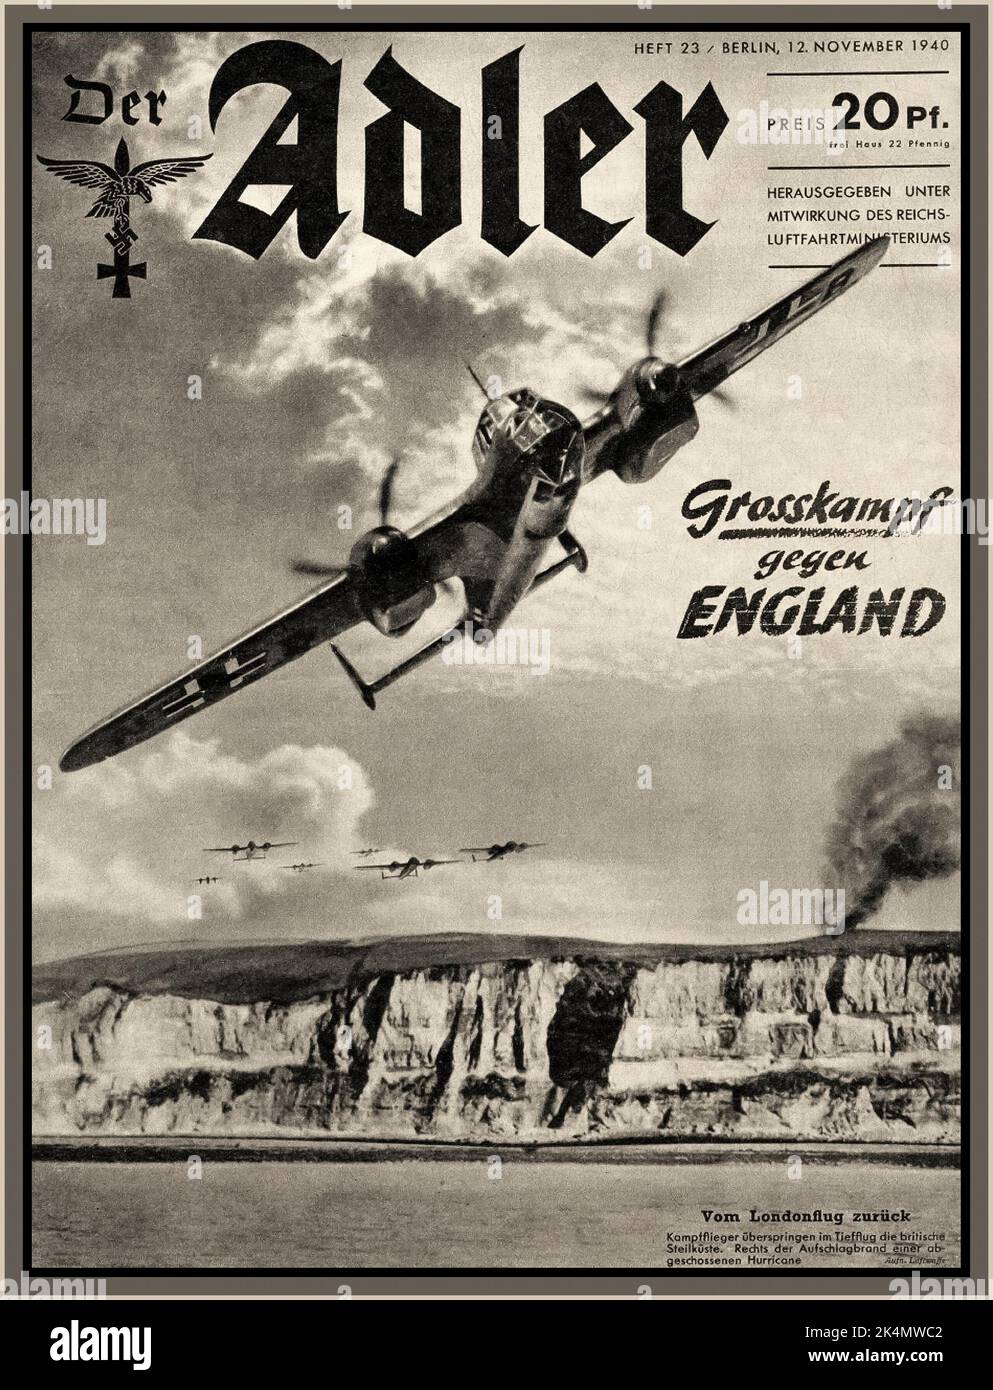 THE BLITZ BATTLE OF BRITAIN  WW2 DER ADLER Nazi Luftwaffe Propaganda magazine 1940 ‘GROSSKAMPF gegen ENGLAND’ “Big fight over England” with Nazi Germany Luftwaffe bombers and fighter planes flying over the White Cliffs of Dover Great Britain World War II Second World War Battle of Britain and The Blitz Stock Photo